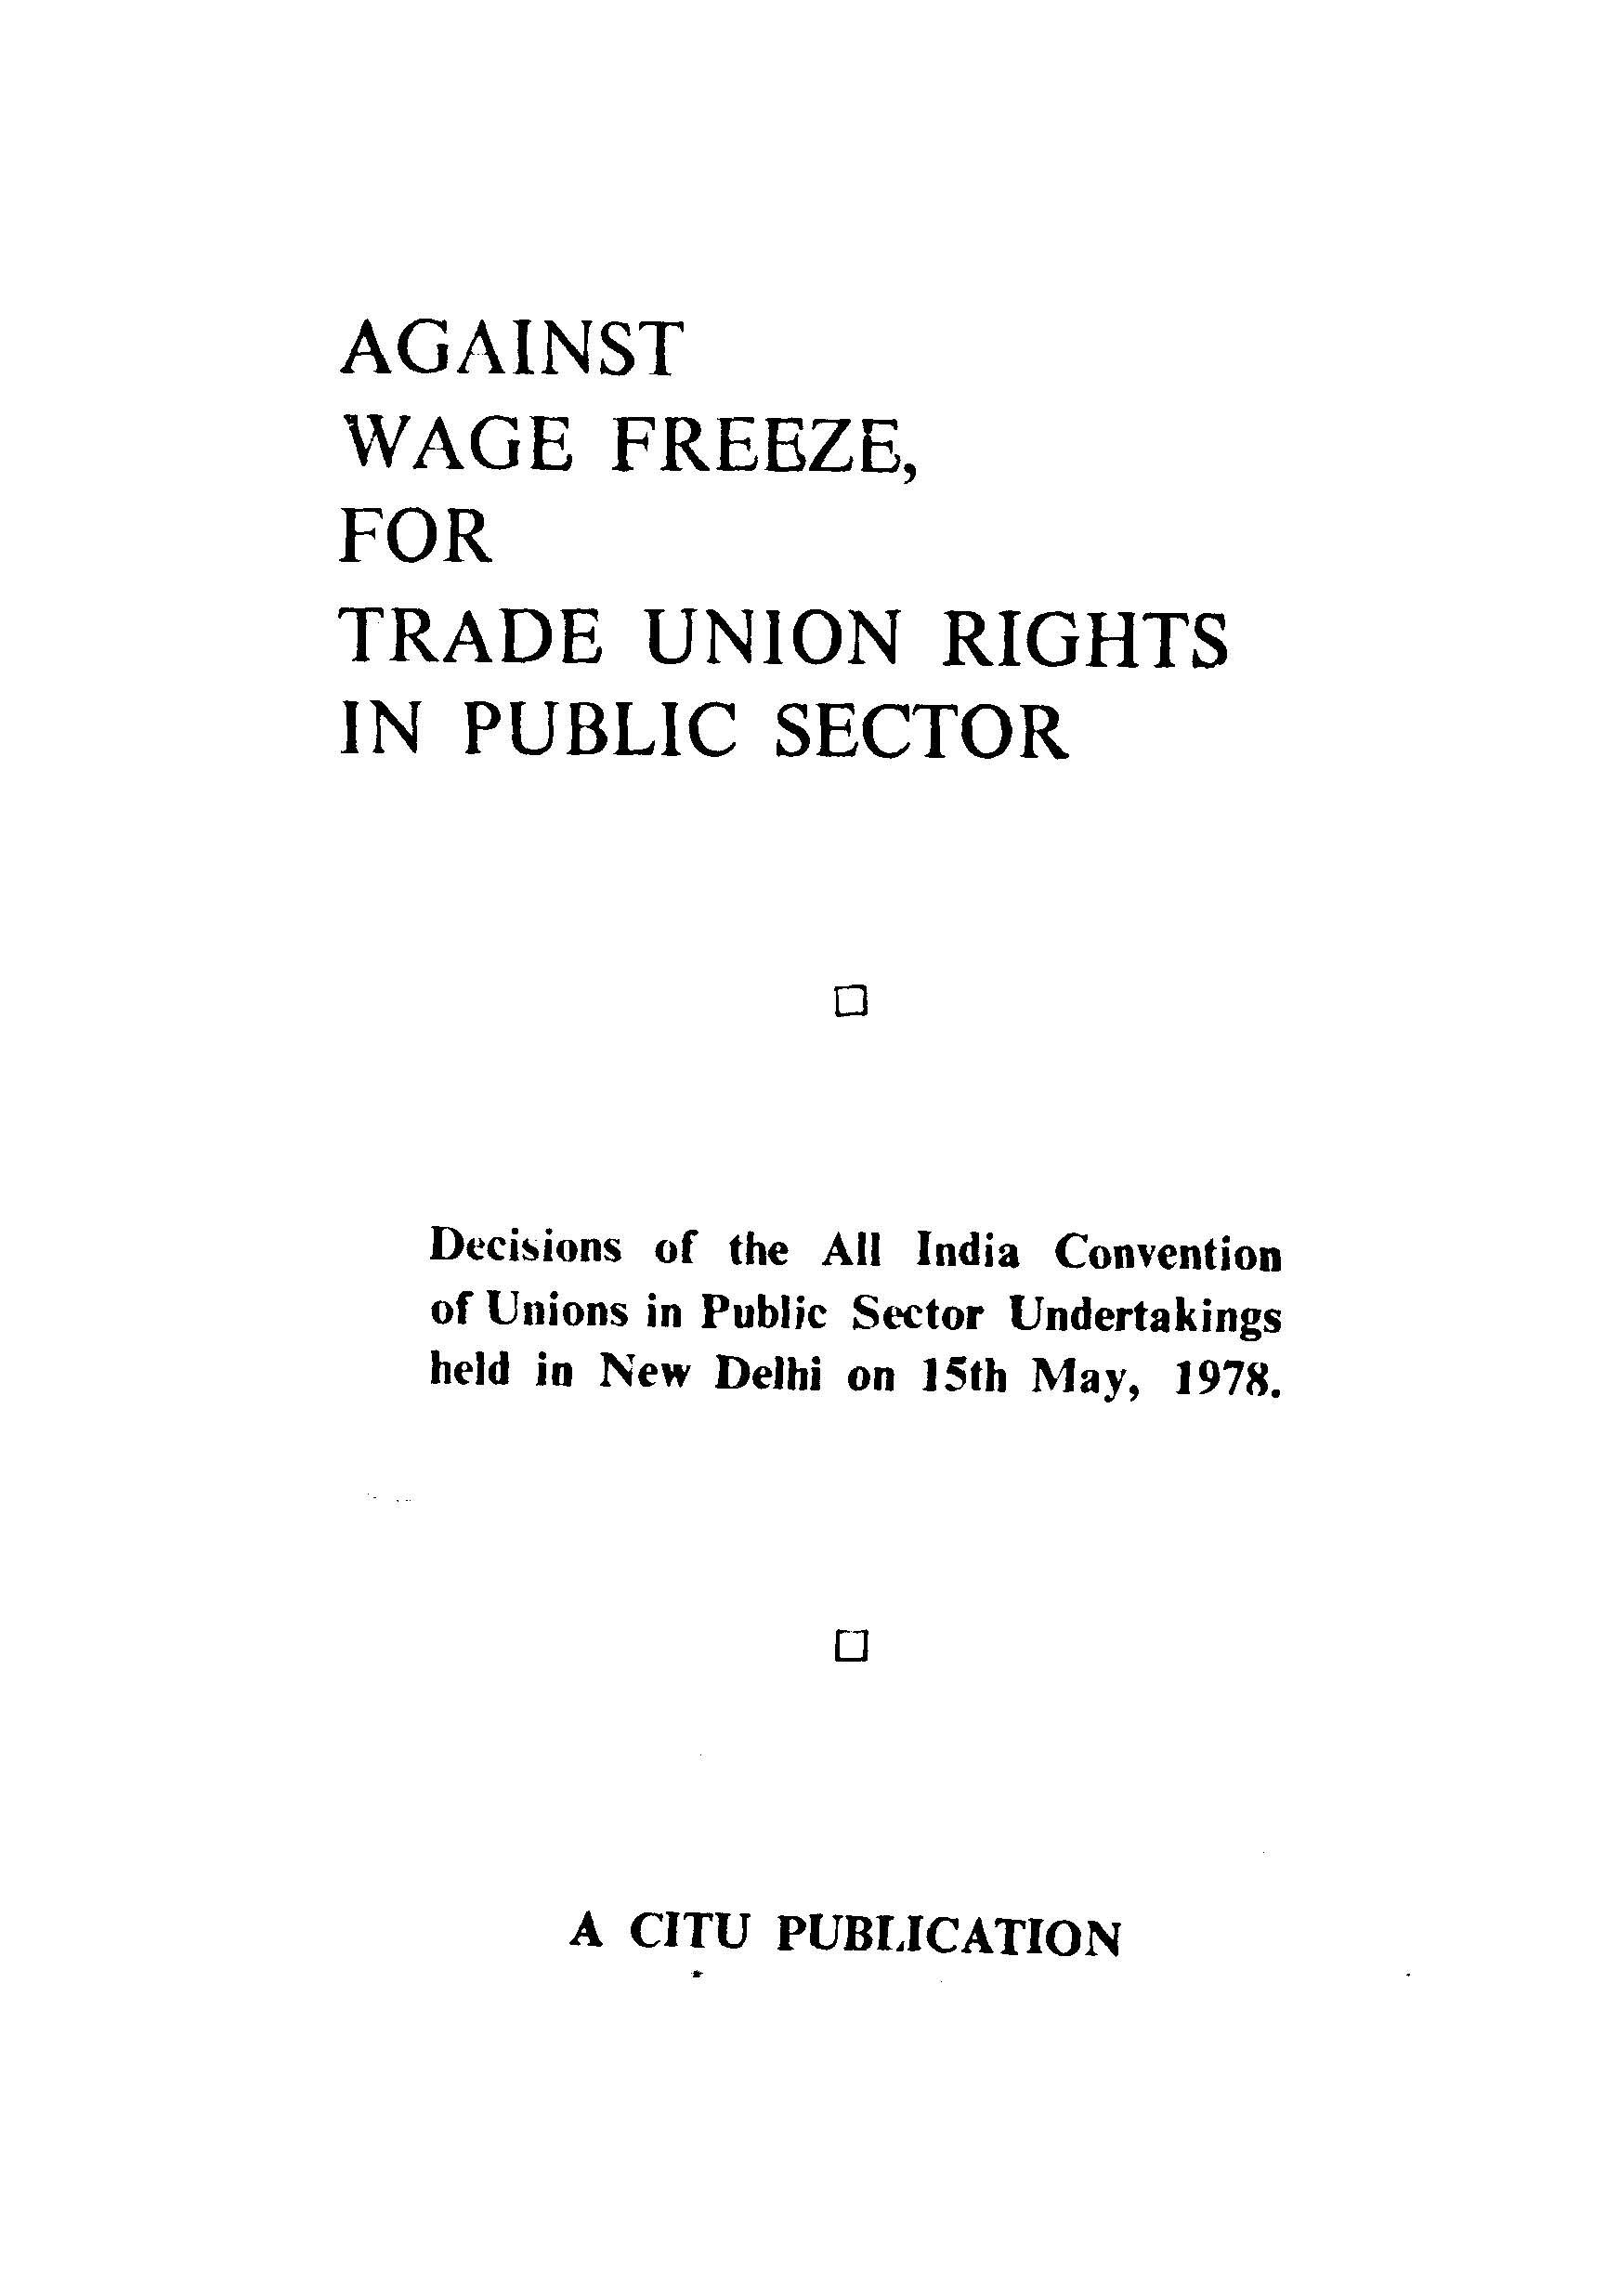 Against Wage Freeze For Trade Union Rights In Public Sector